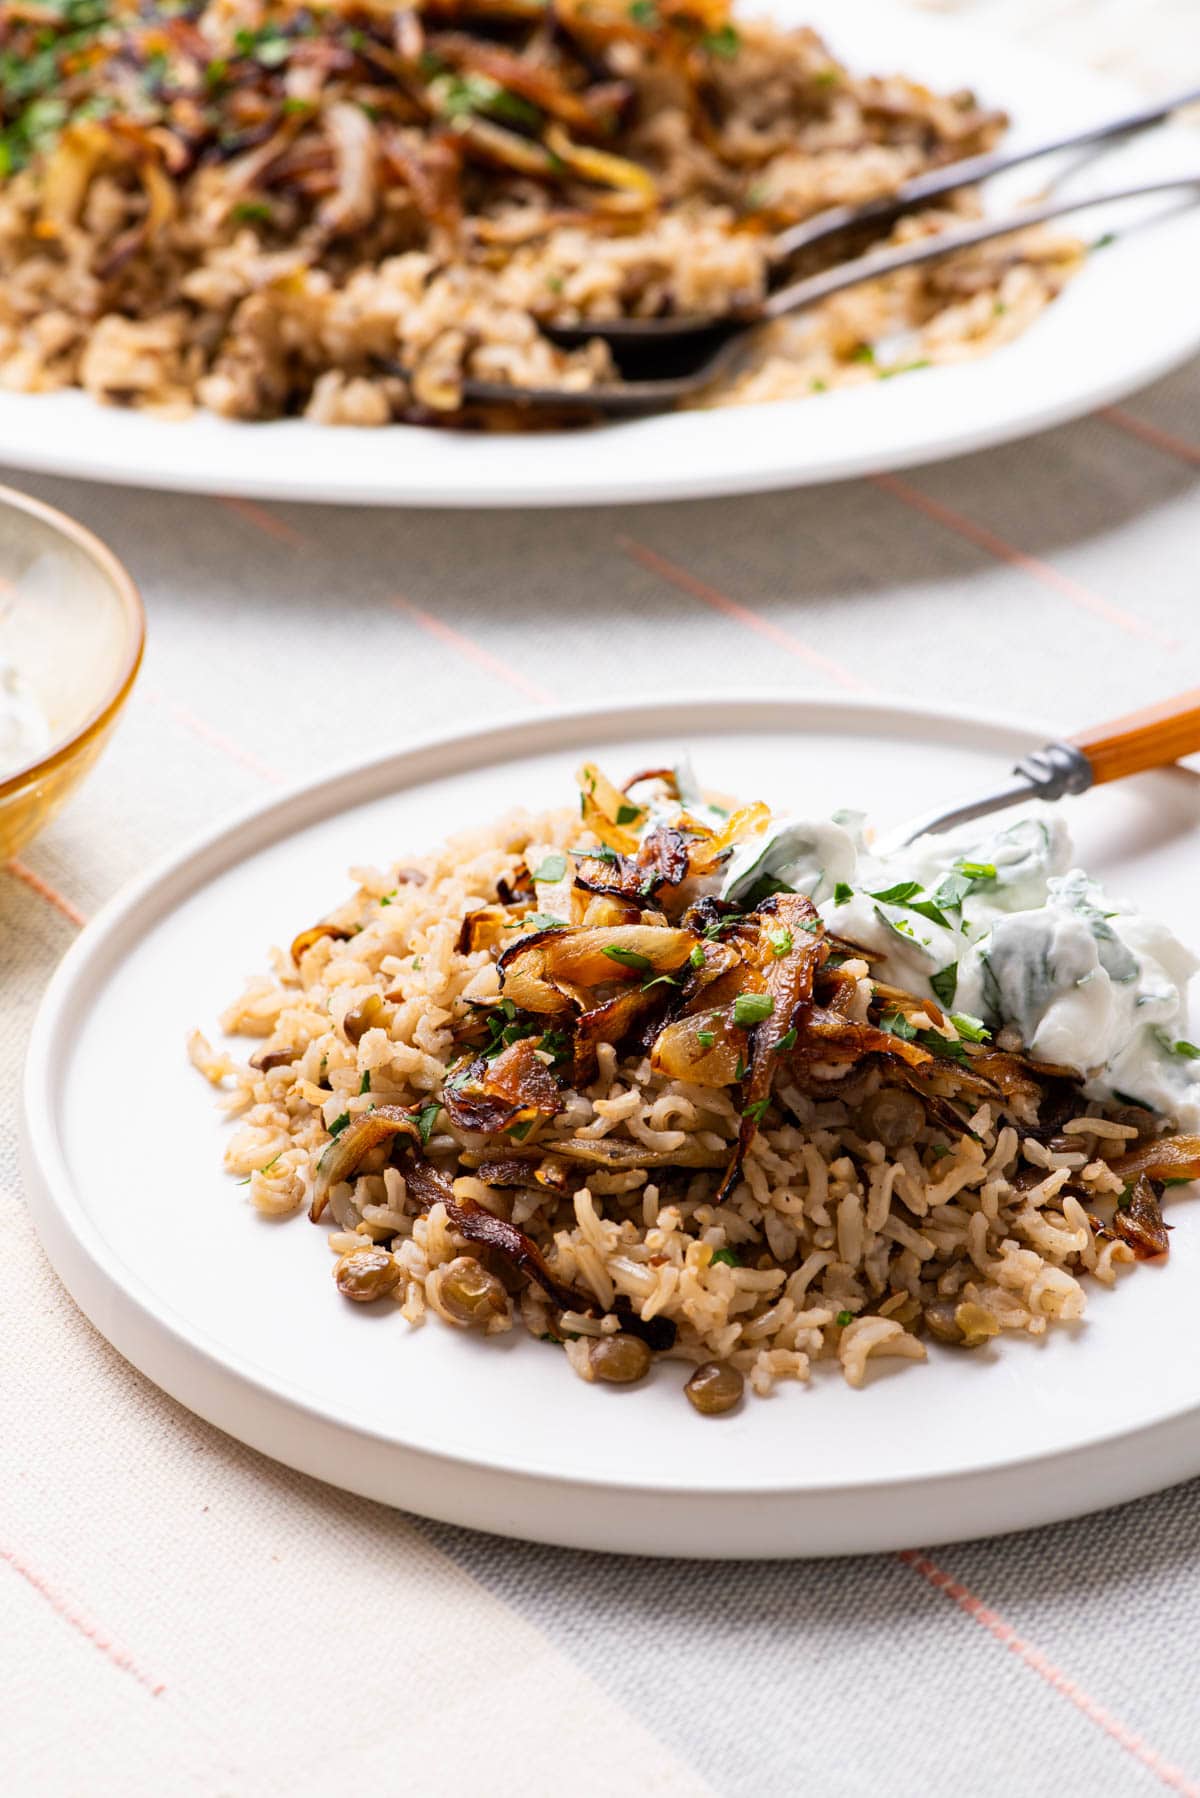 Middle Eastern Mujadara (brown rice and lentils with fried onions) on a blue-rimmed platter next to a wooden bowl of yogurt sauce